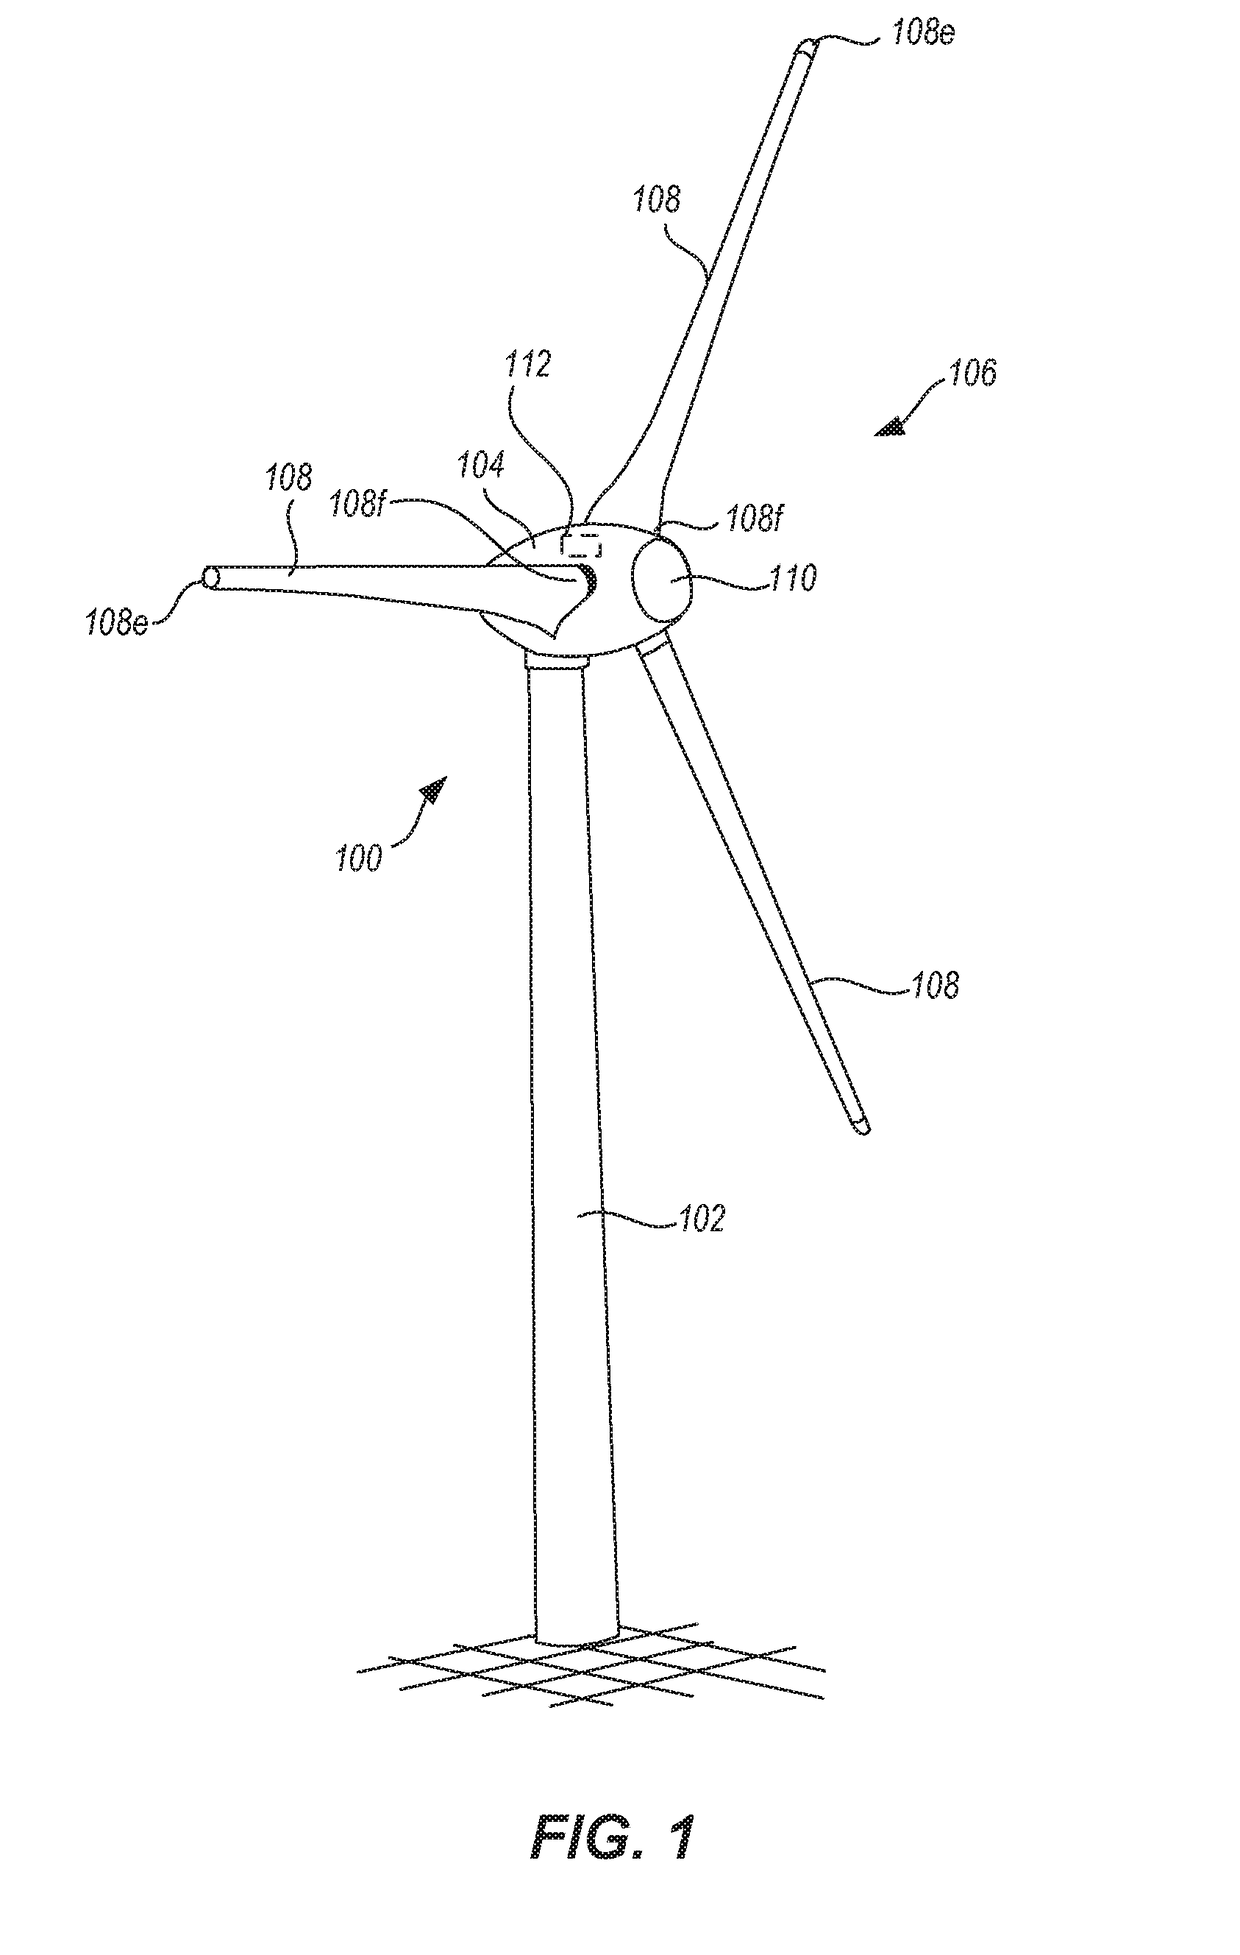 Method for determining the remaining service life of a wind turbine